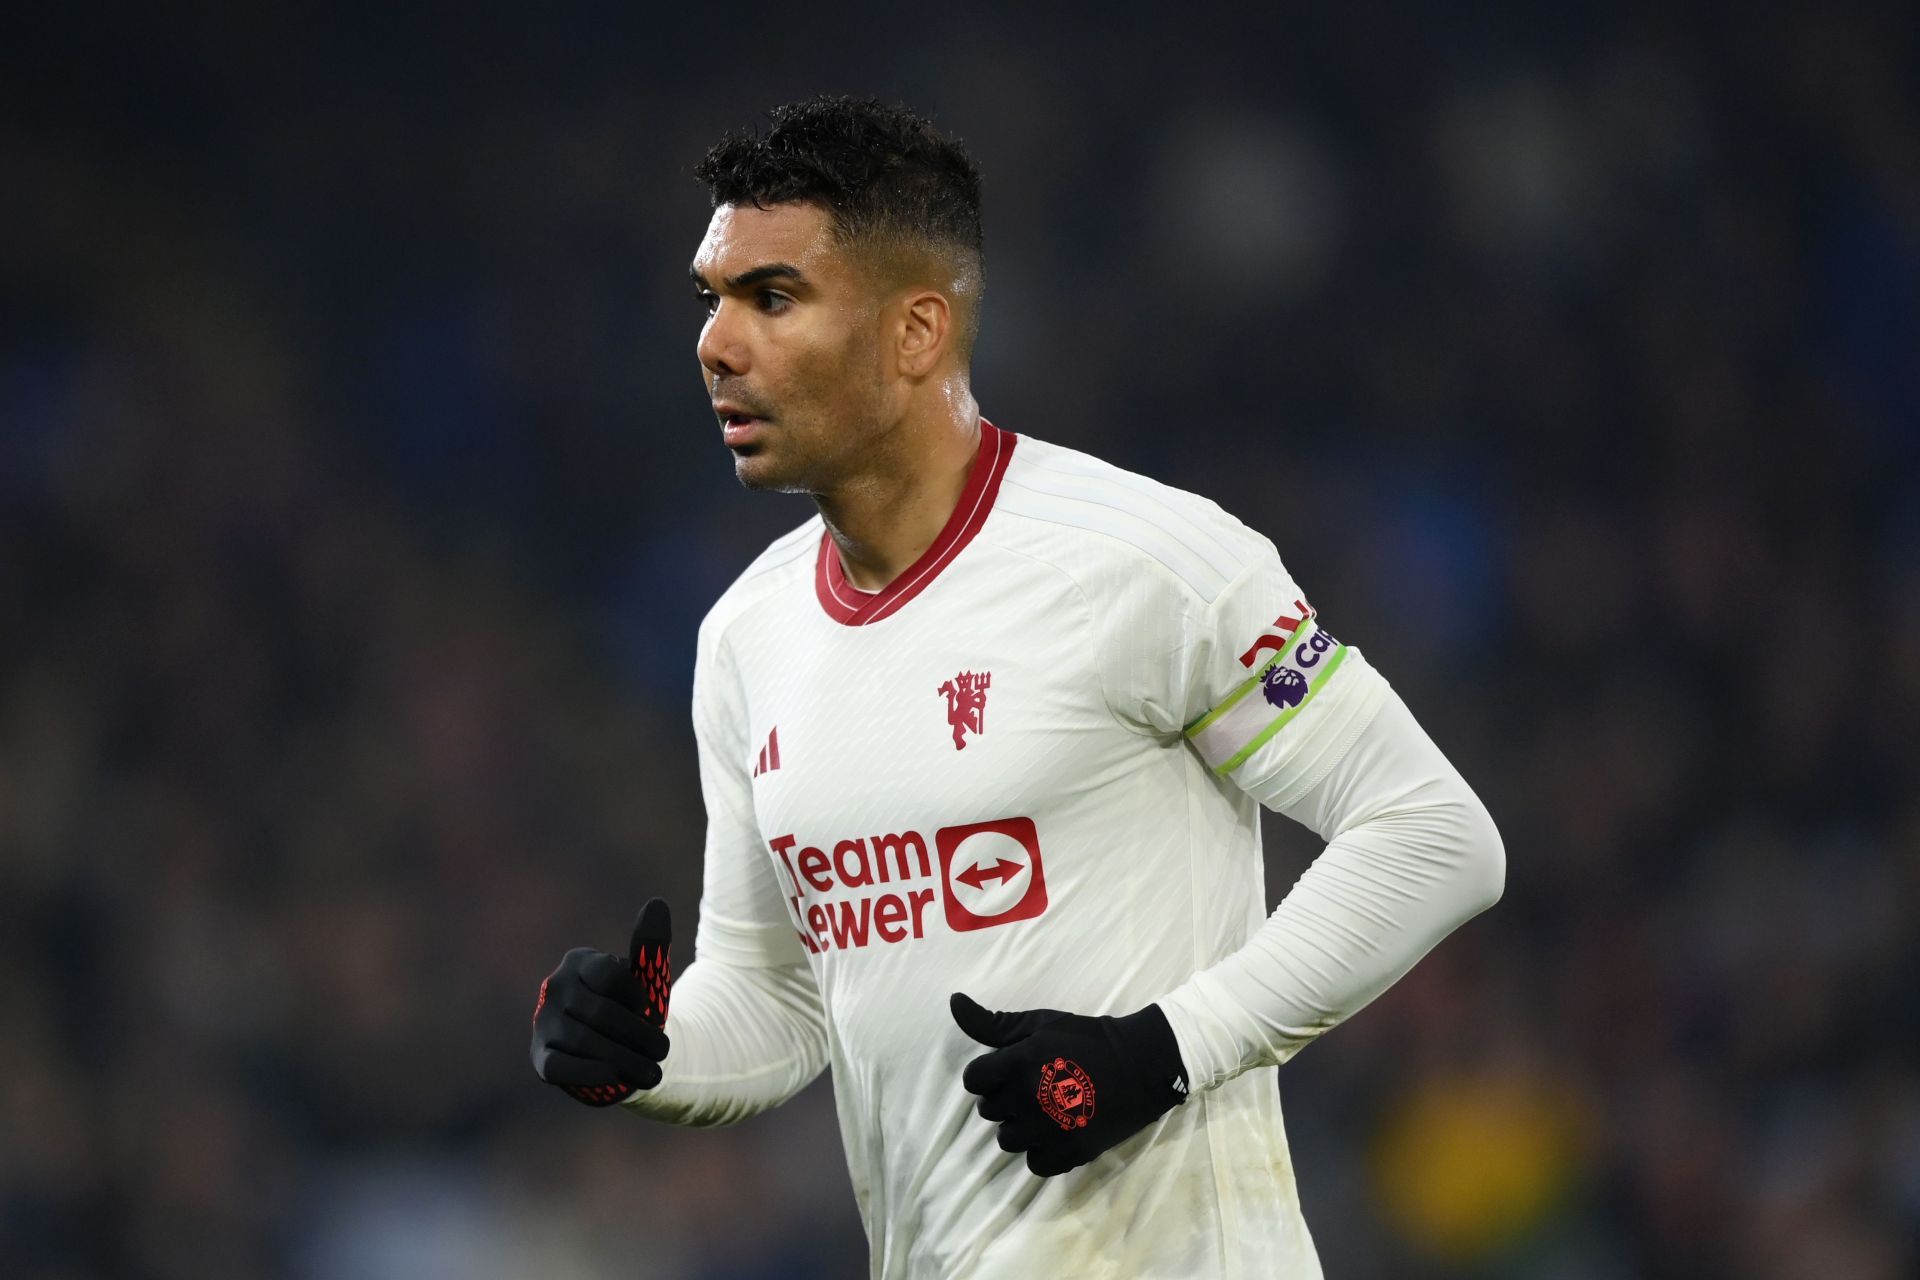 Casemiro has been a disappointment this season